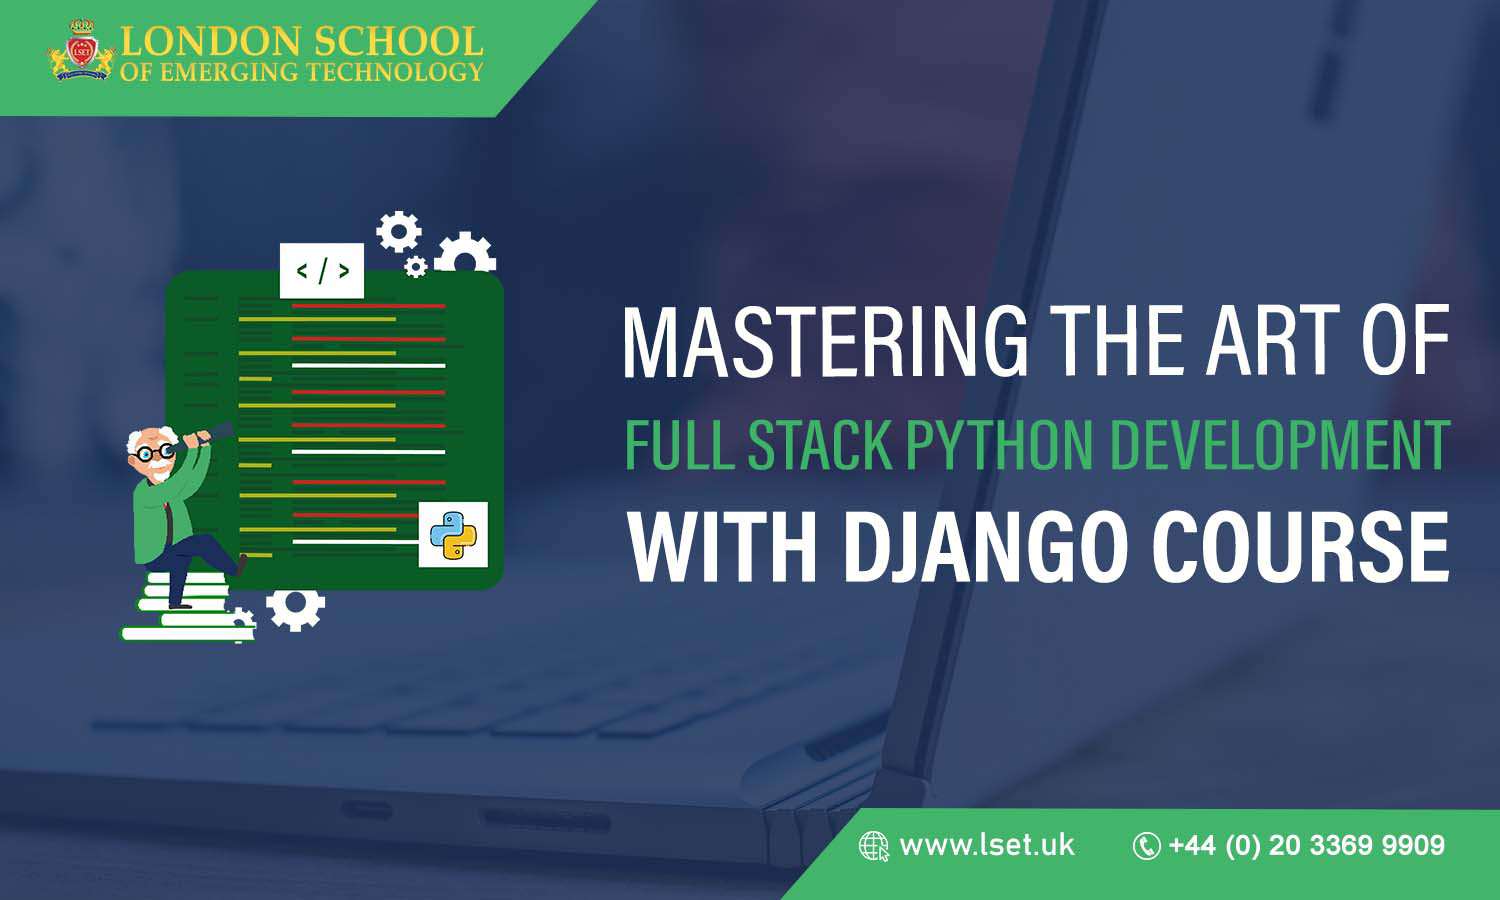 Mastering the Art of Full Stack Python Development with Django Course 9ap